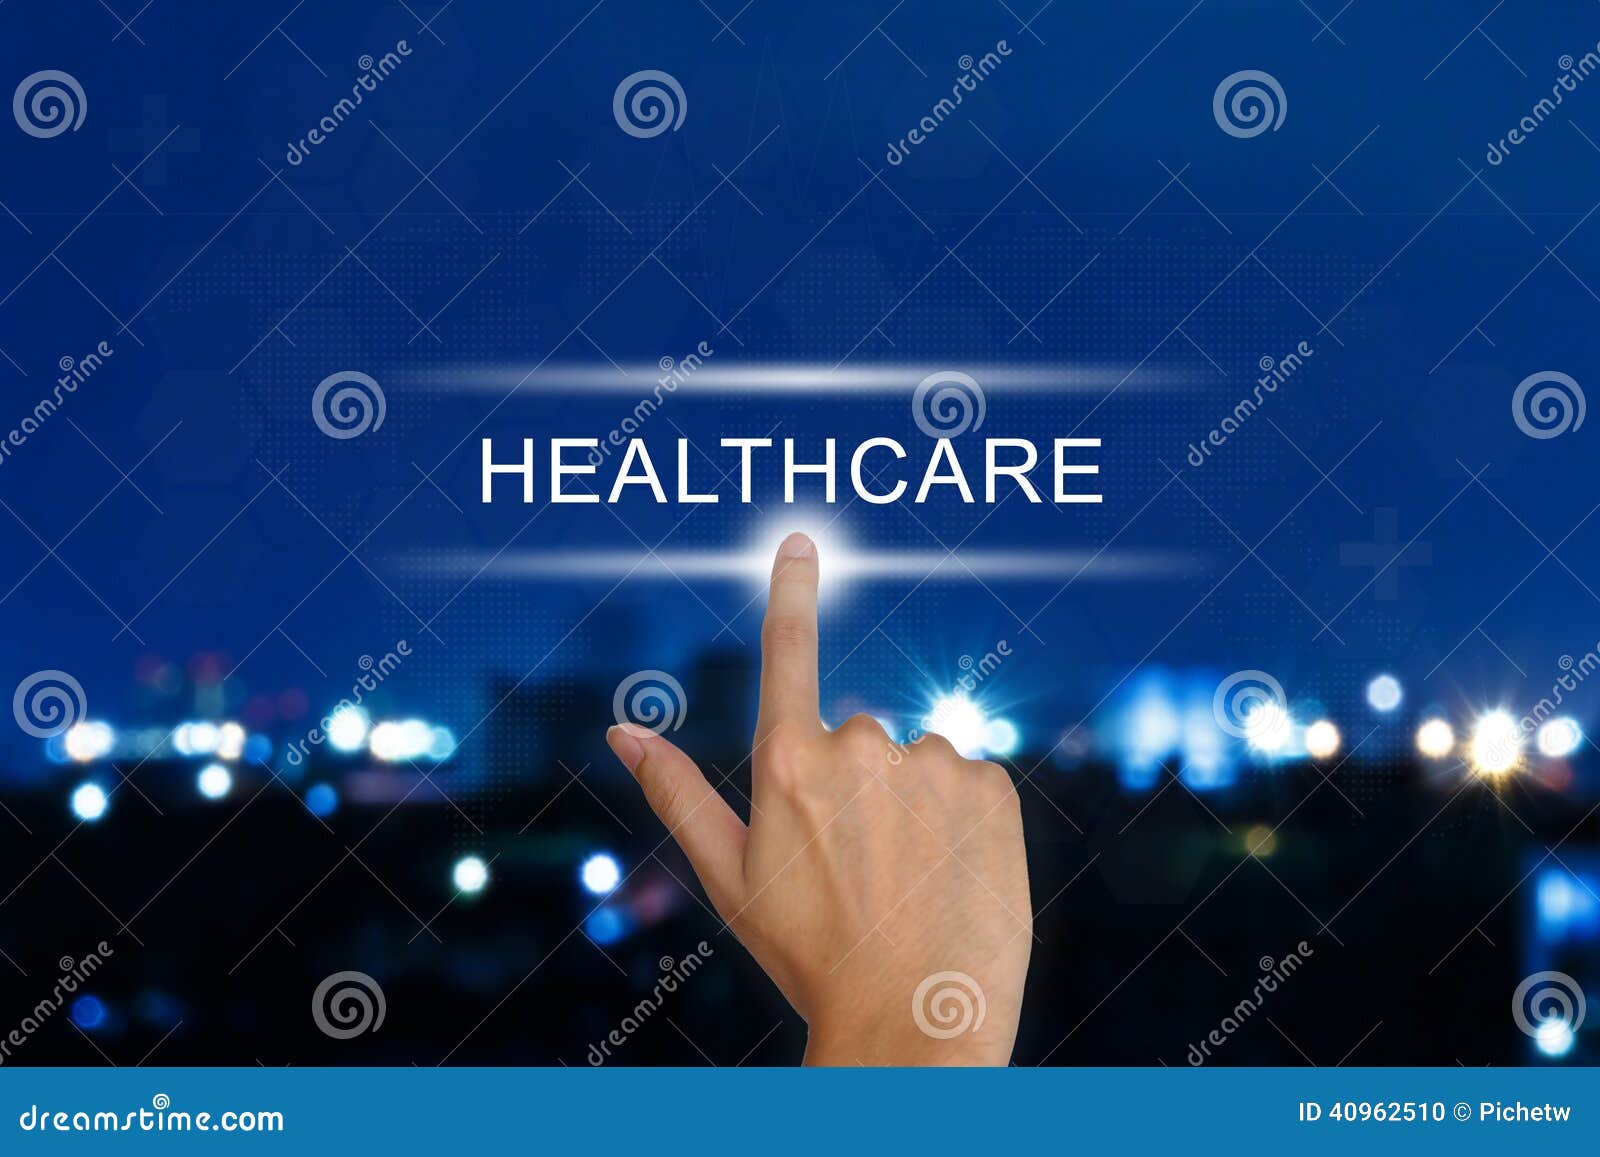 hand pushing healthcare button on touch screen